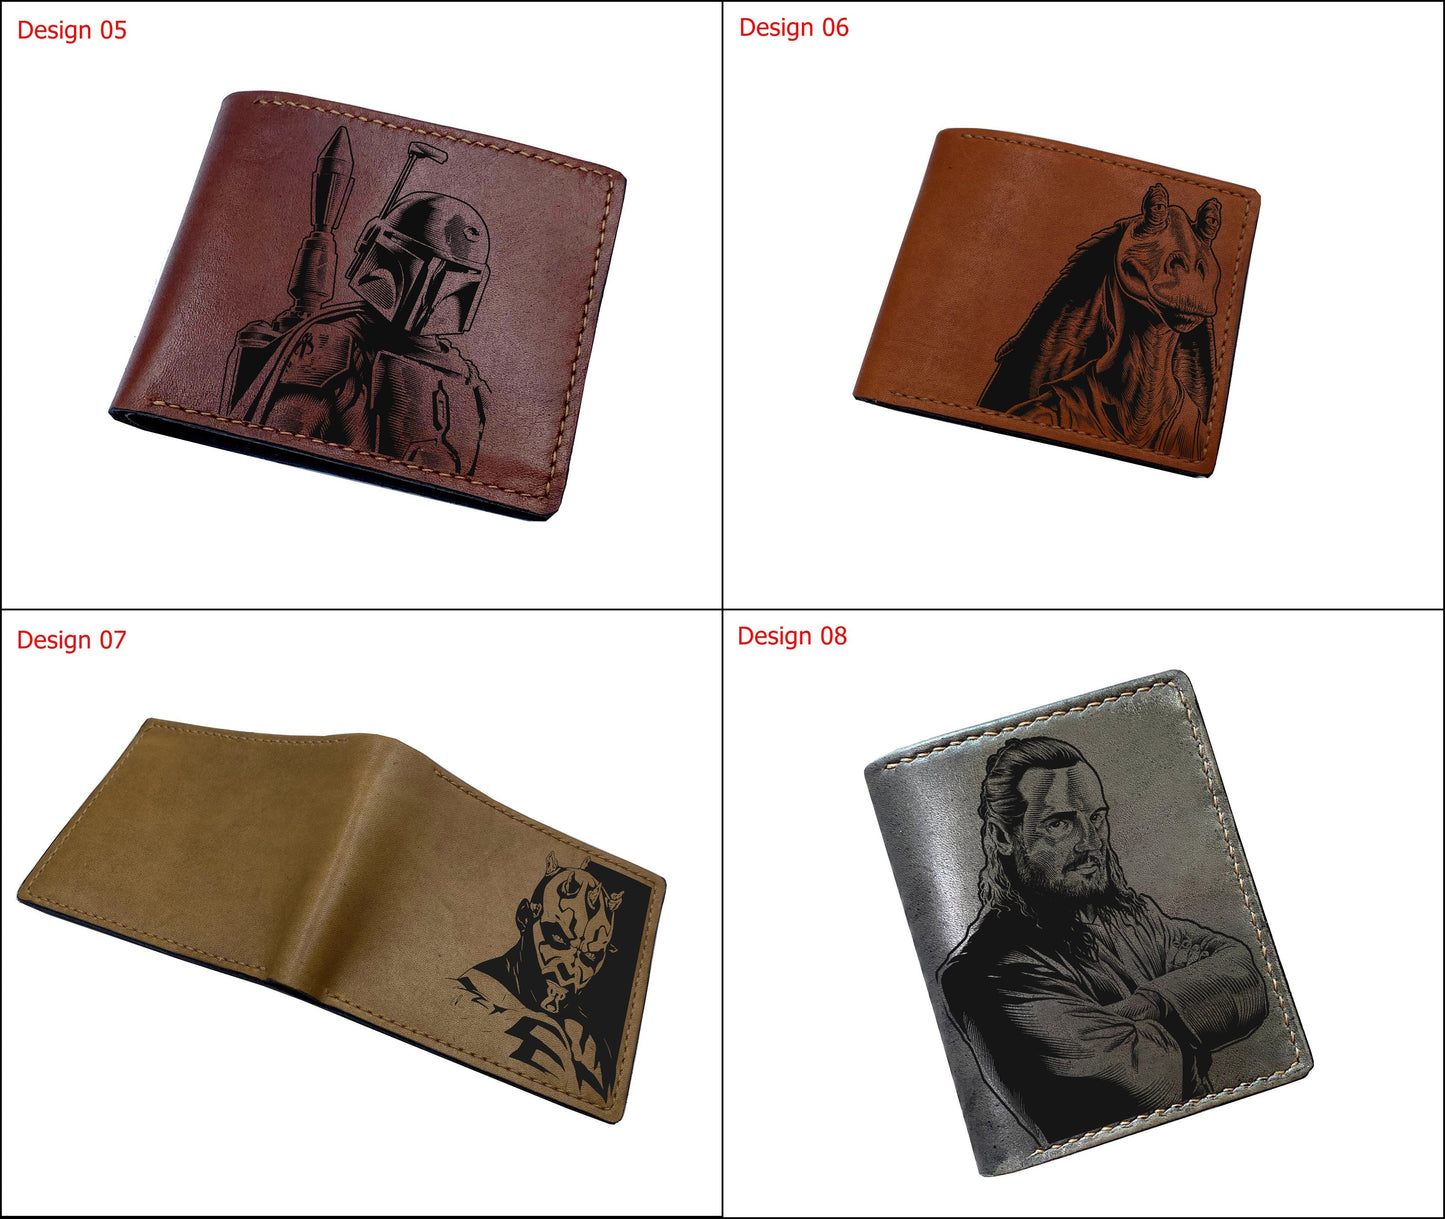 Customized leather Starwars wallet, bifold leather wallet for him, leather anniversary present, birthday gift for boyfriend